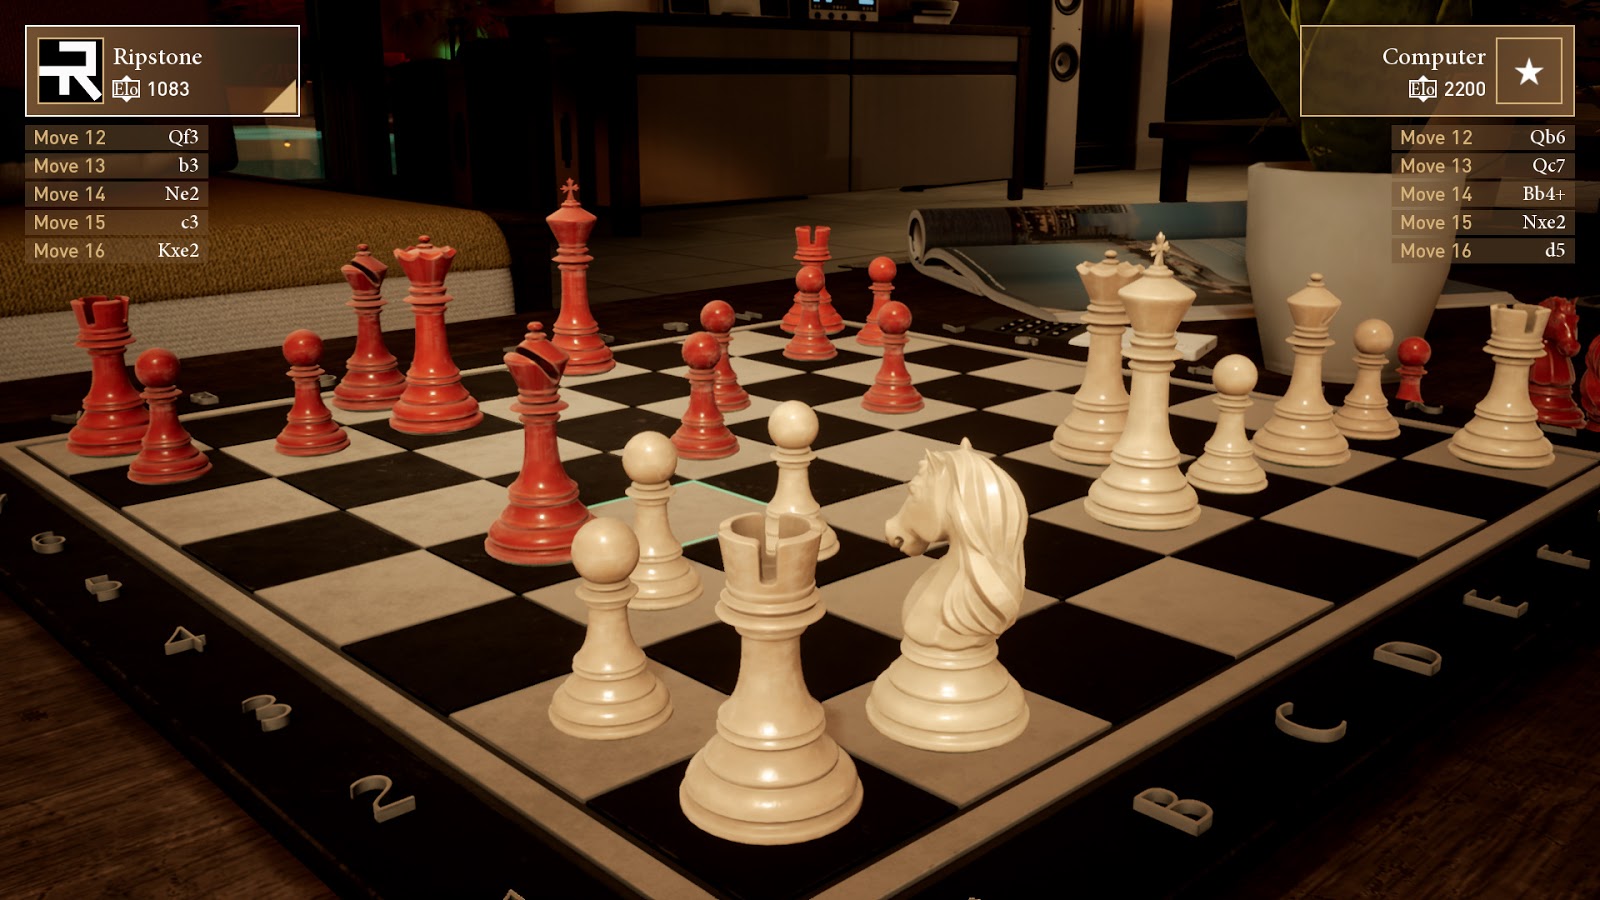 PS4 Double Review] Chess Ultra Review